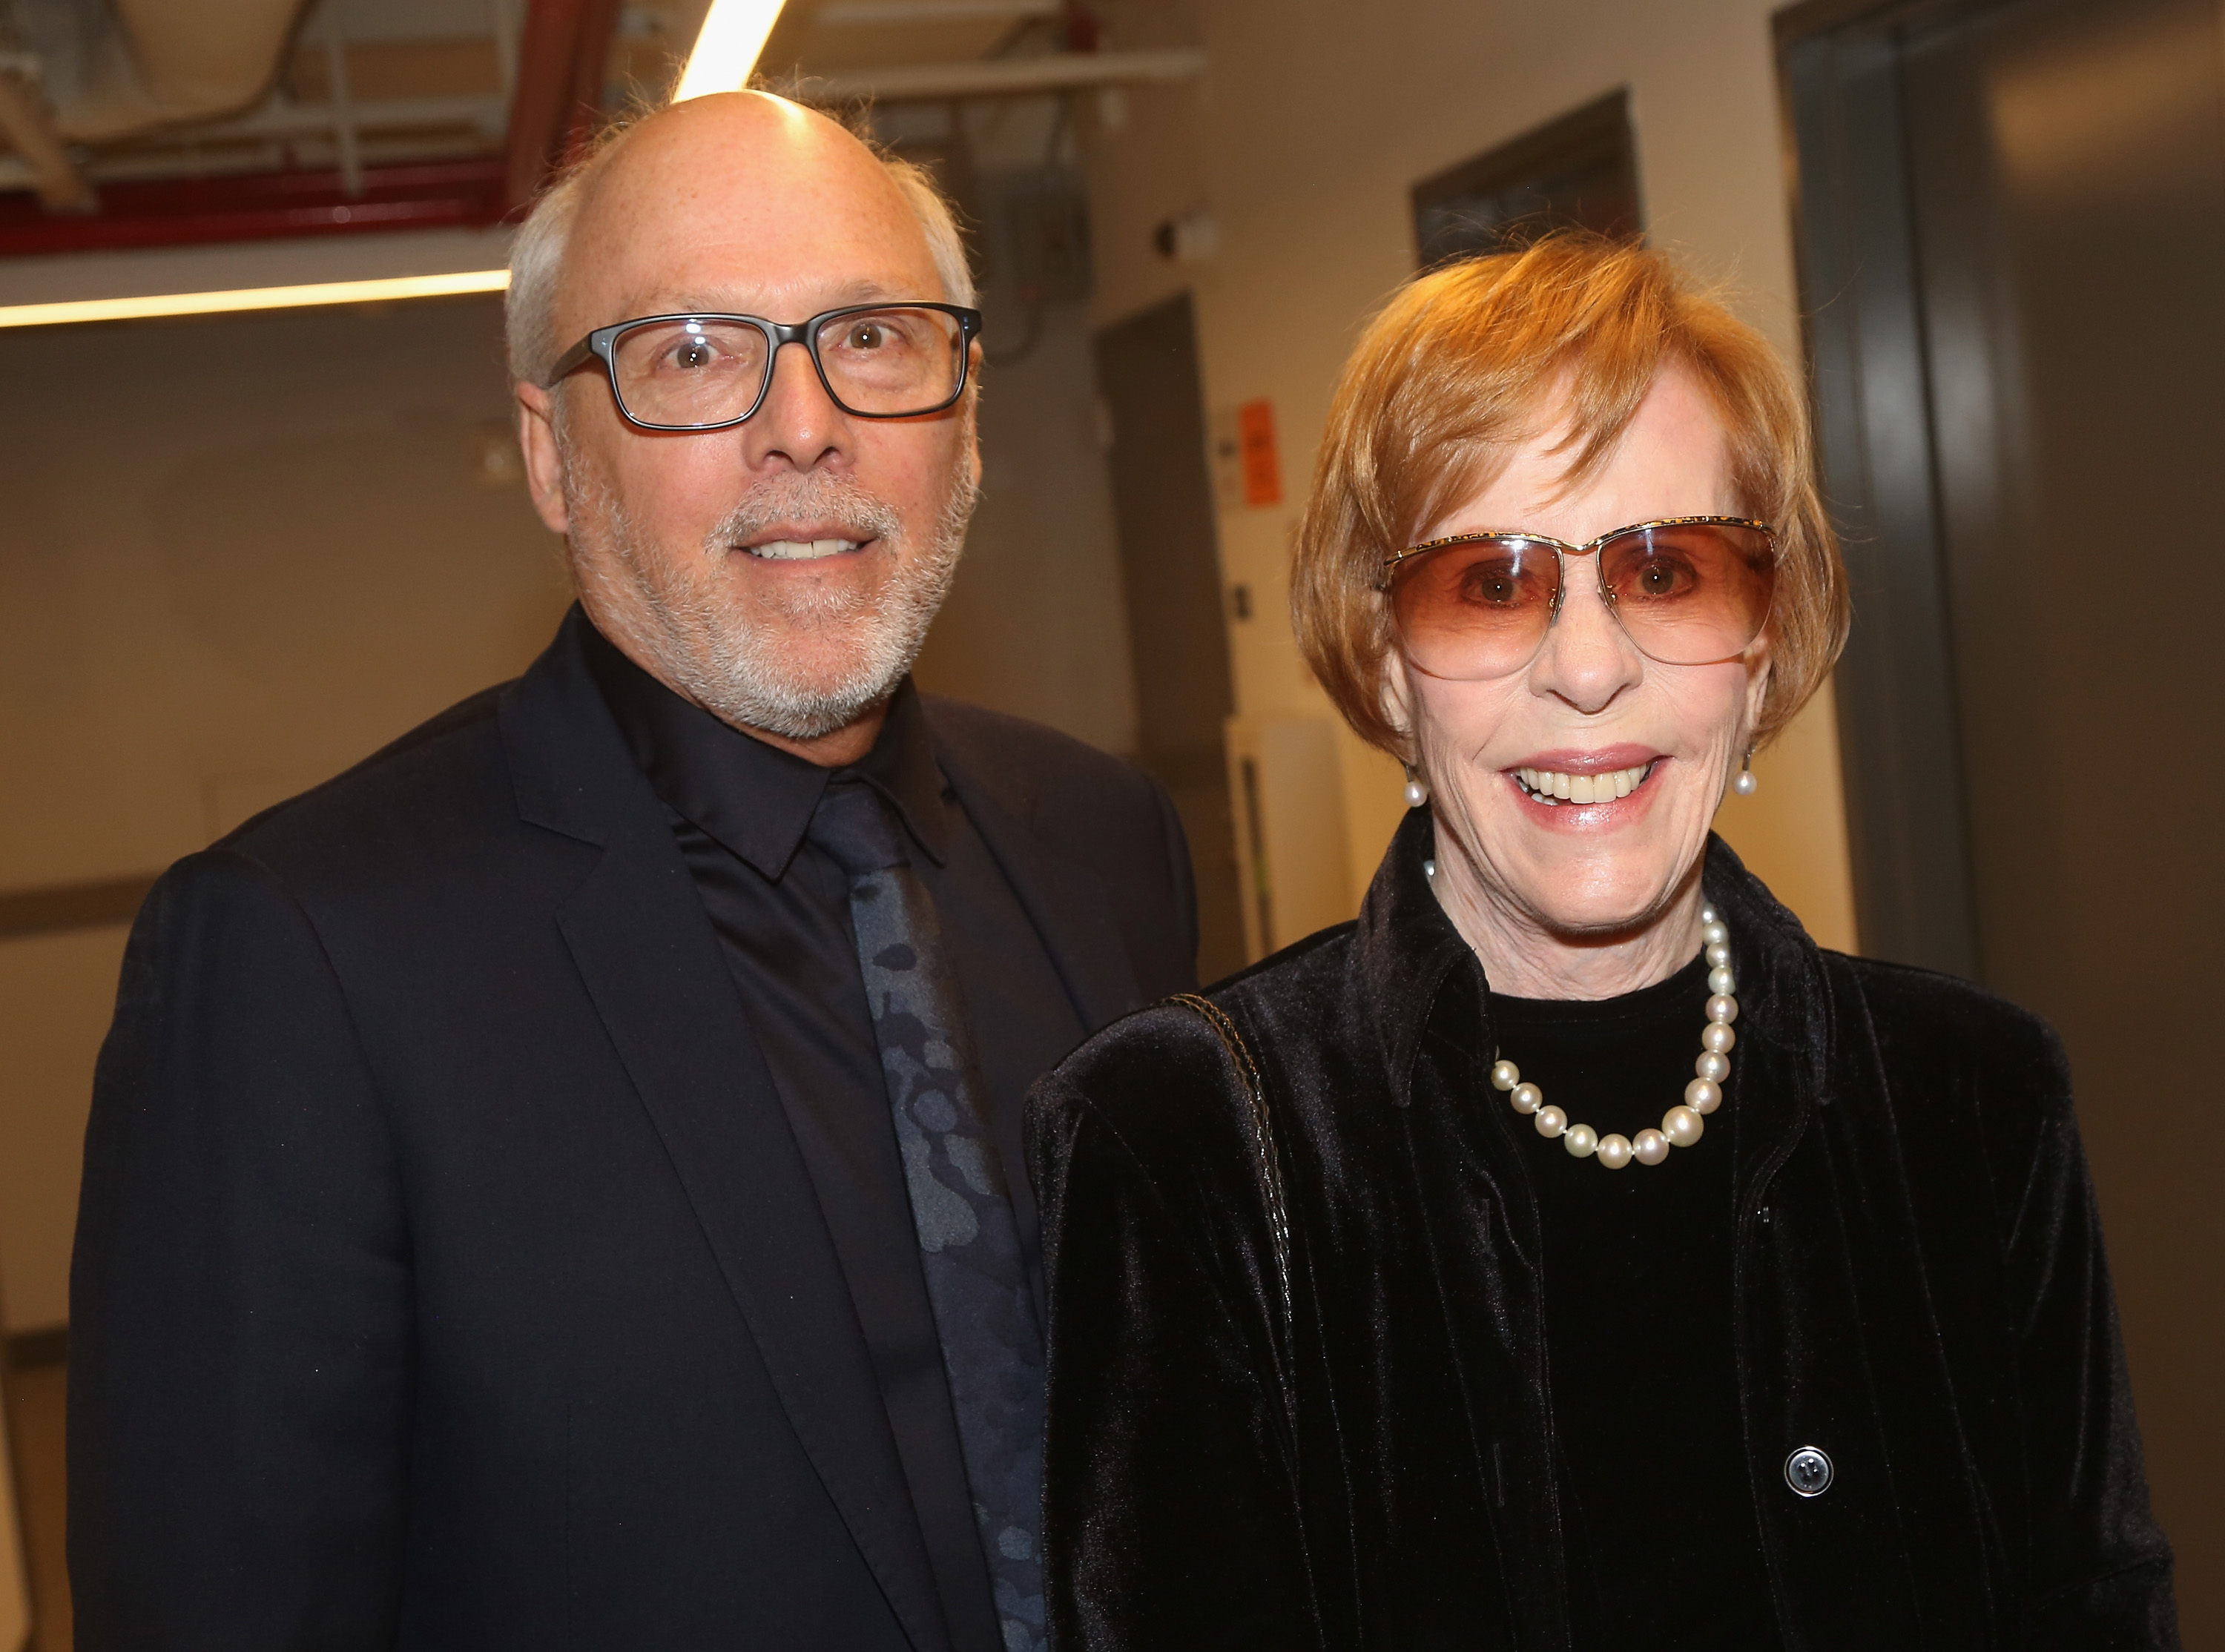 Brian Miller and Carol Burnett at The Marquis Theatre on April 23, 2019 in New York City | Source: Getty Images